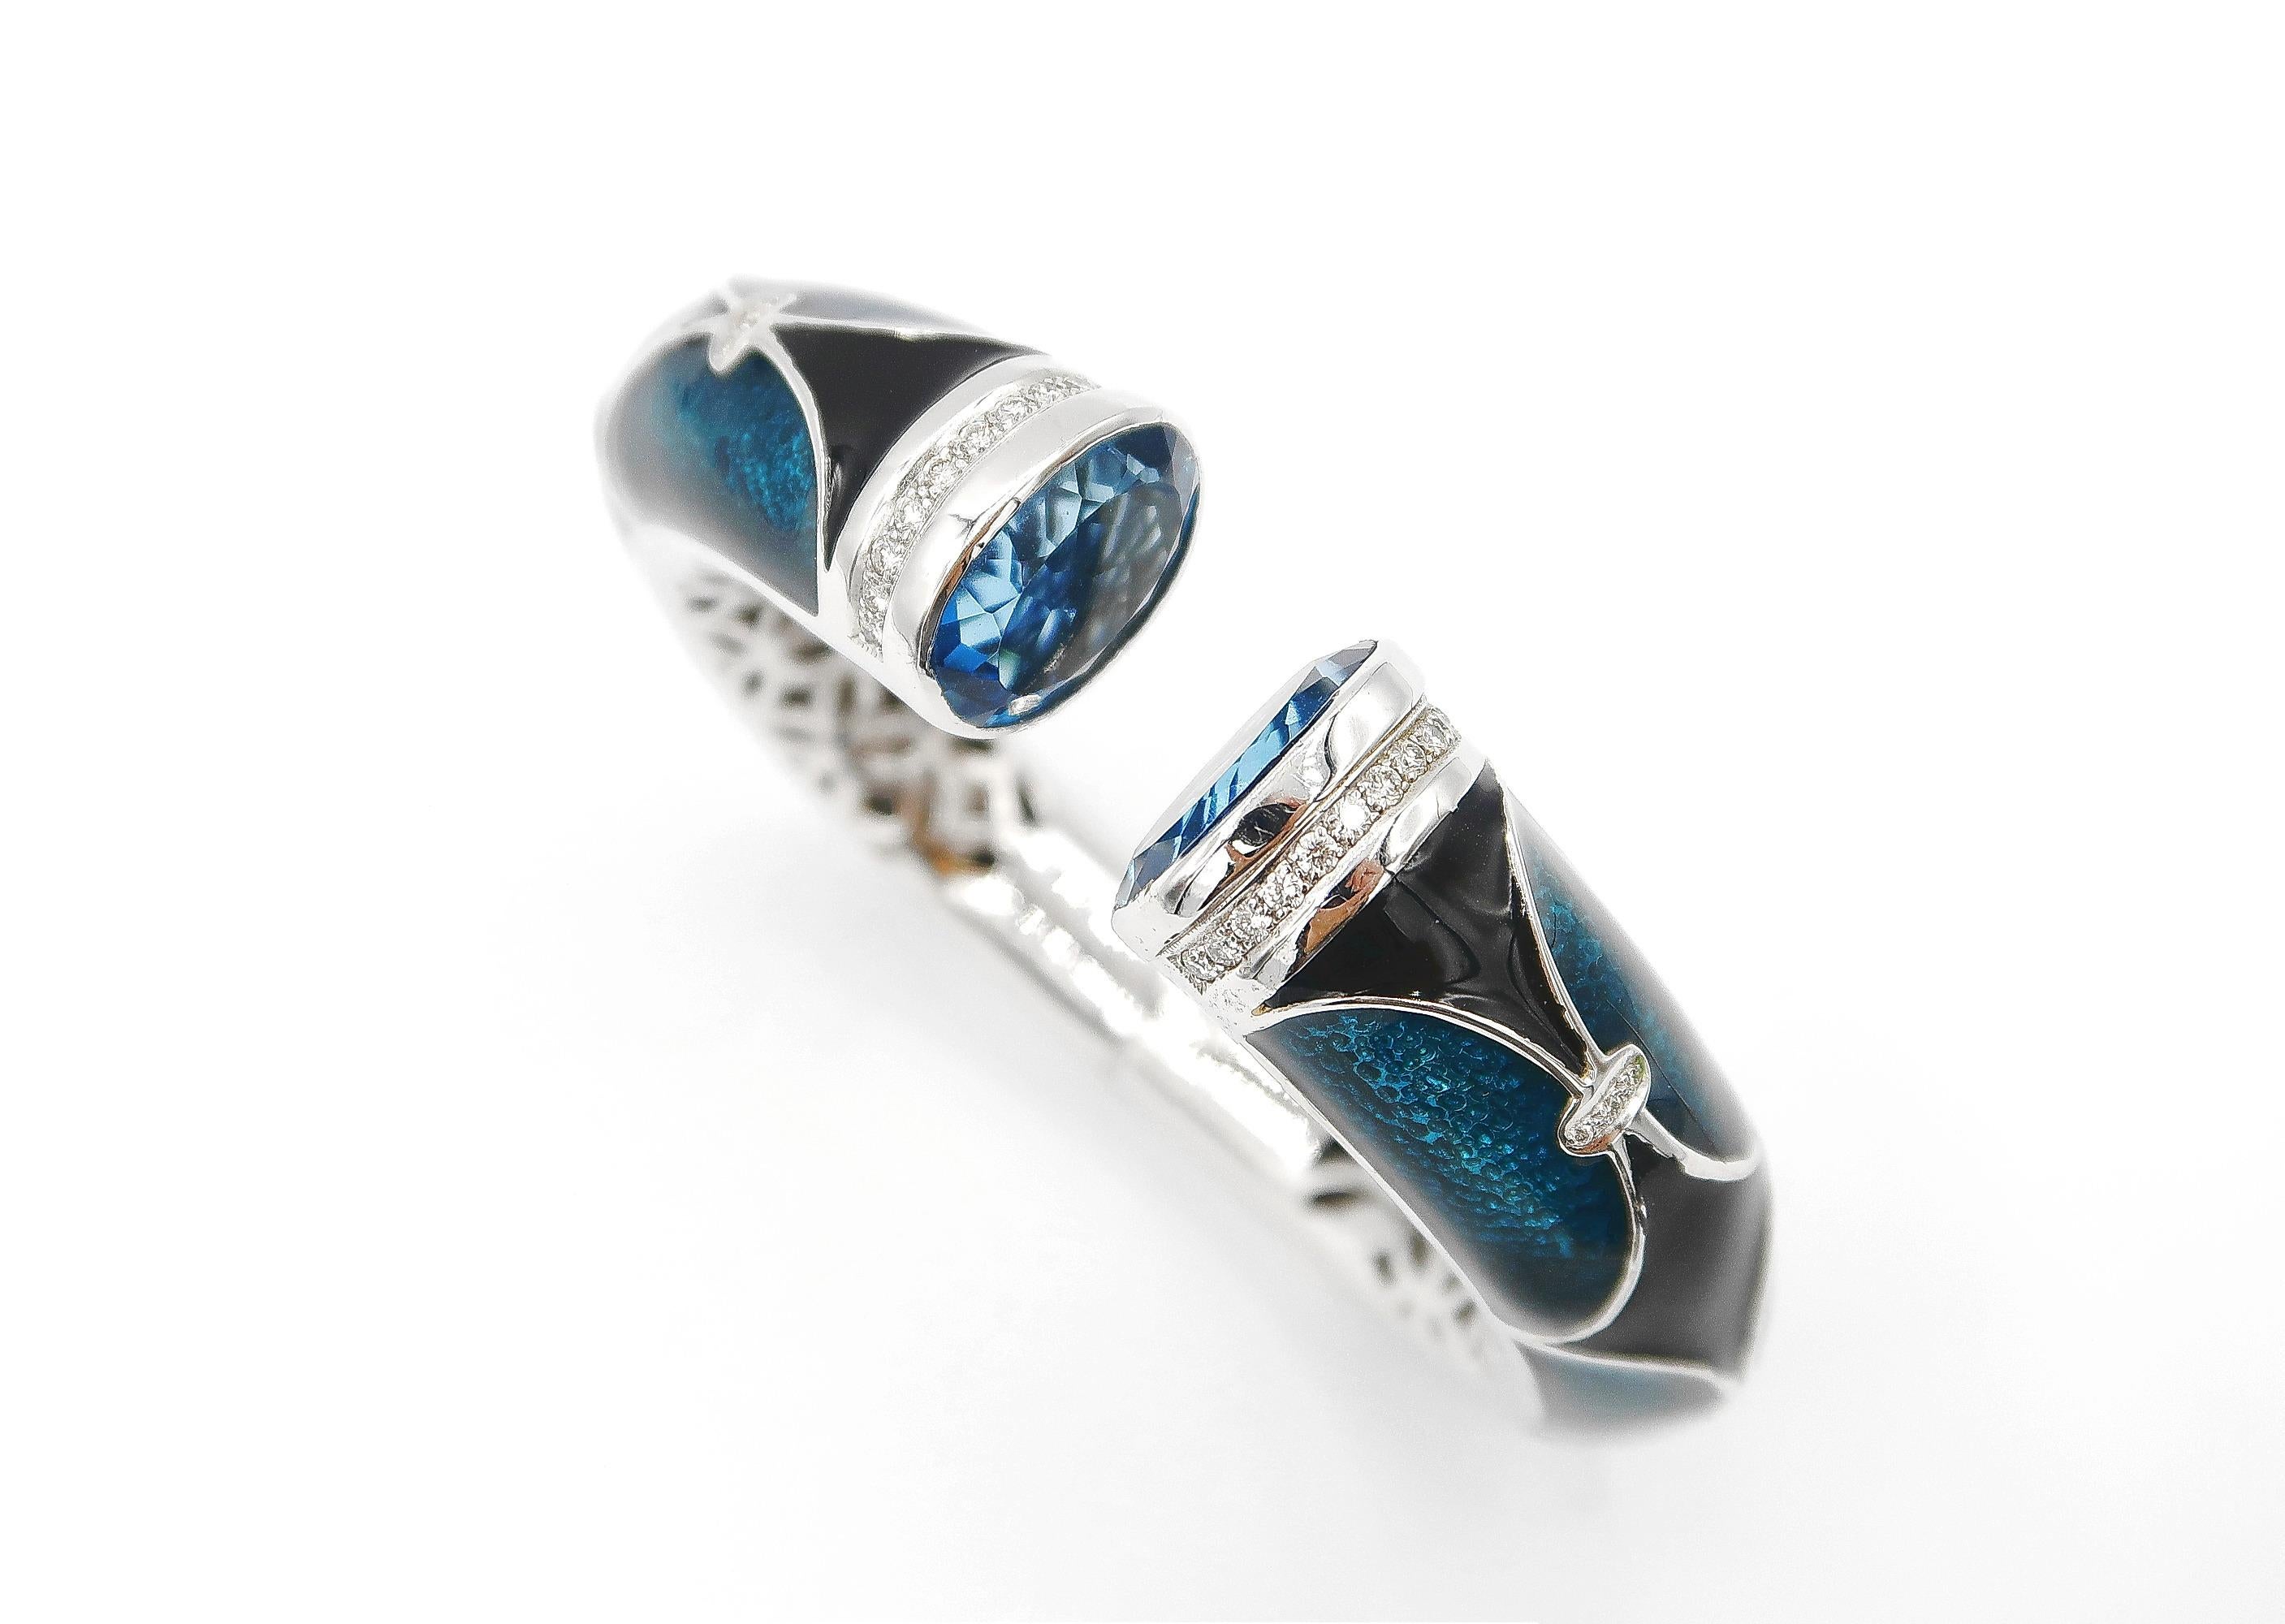 Blue and Black Enamelled, Blue Topaz, and Diamond Clamper Bangle in 18K Gold 

Metal: 18K Gold, 75.98 g
Blue Topaz: Oval, 25.07 ct
Diamond: Round Brilliant, 0.70 ct